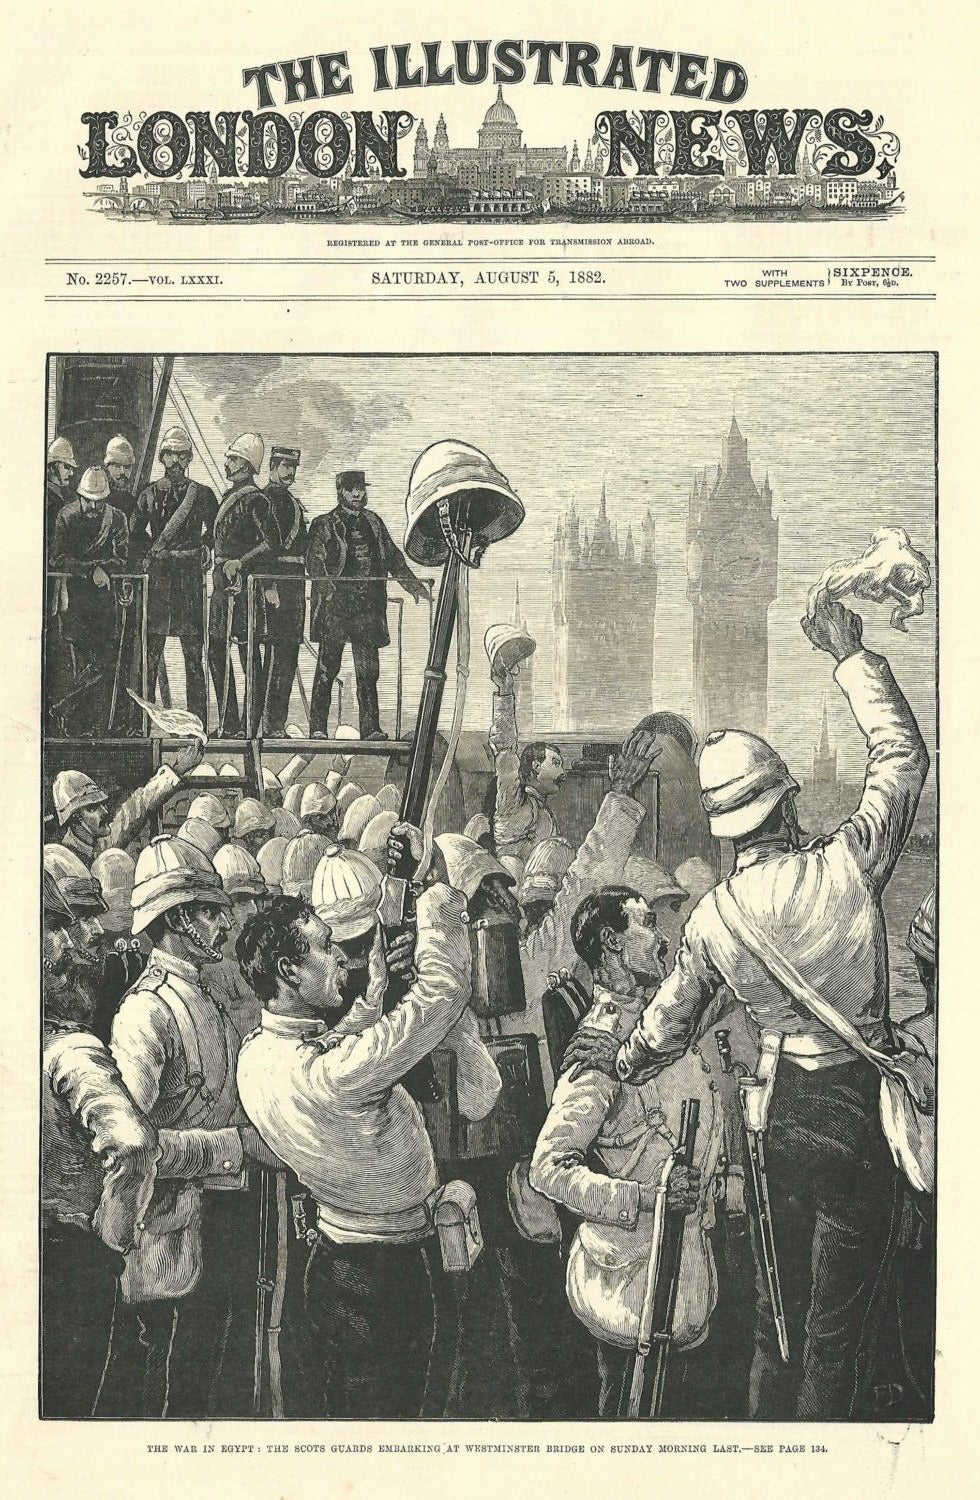 Scots Guards embark at Westminster Bridge for Egypt antique print 1882